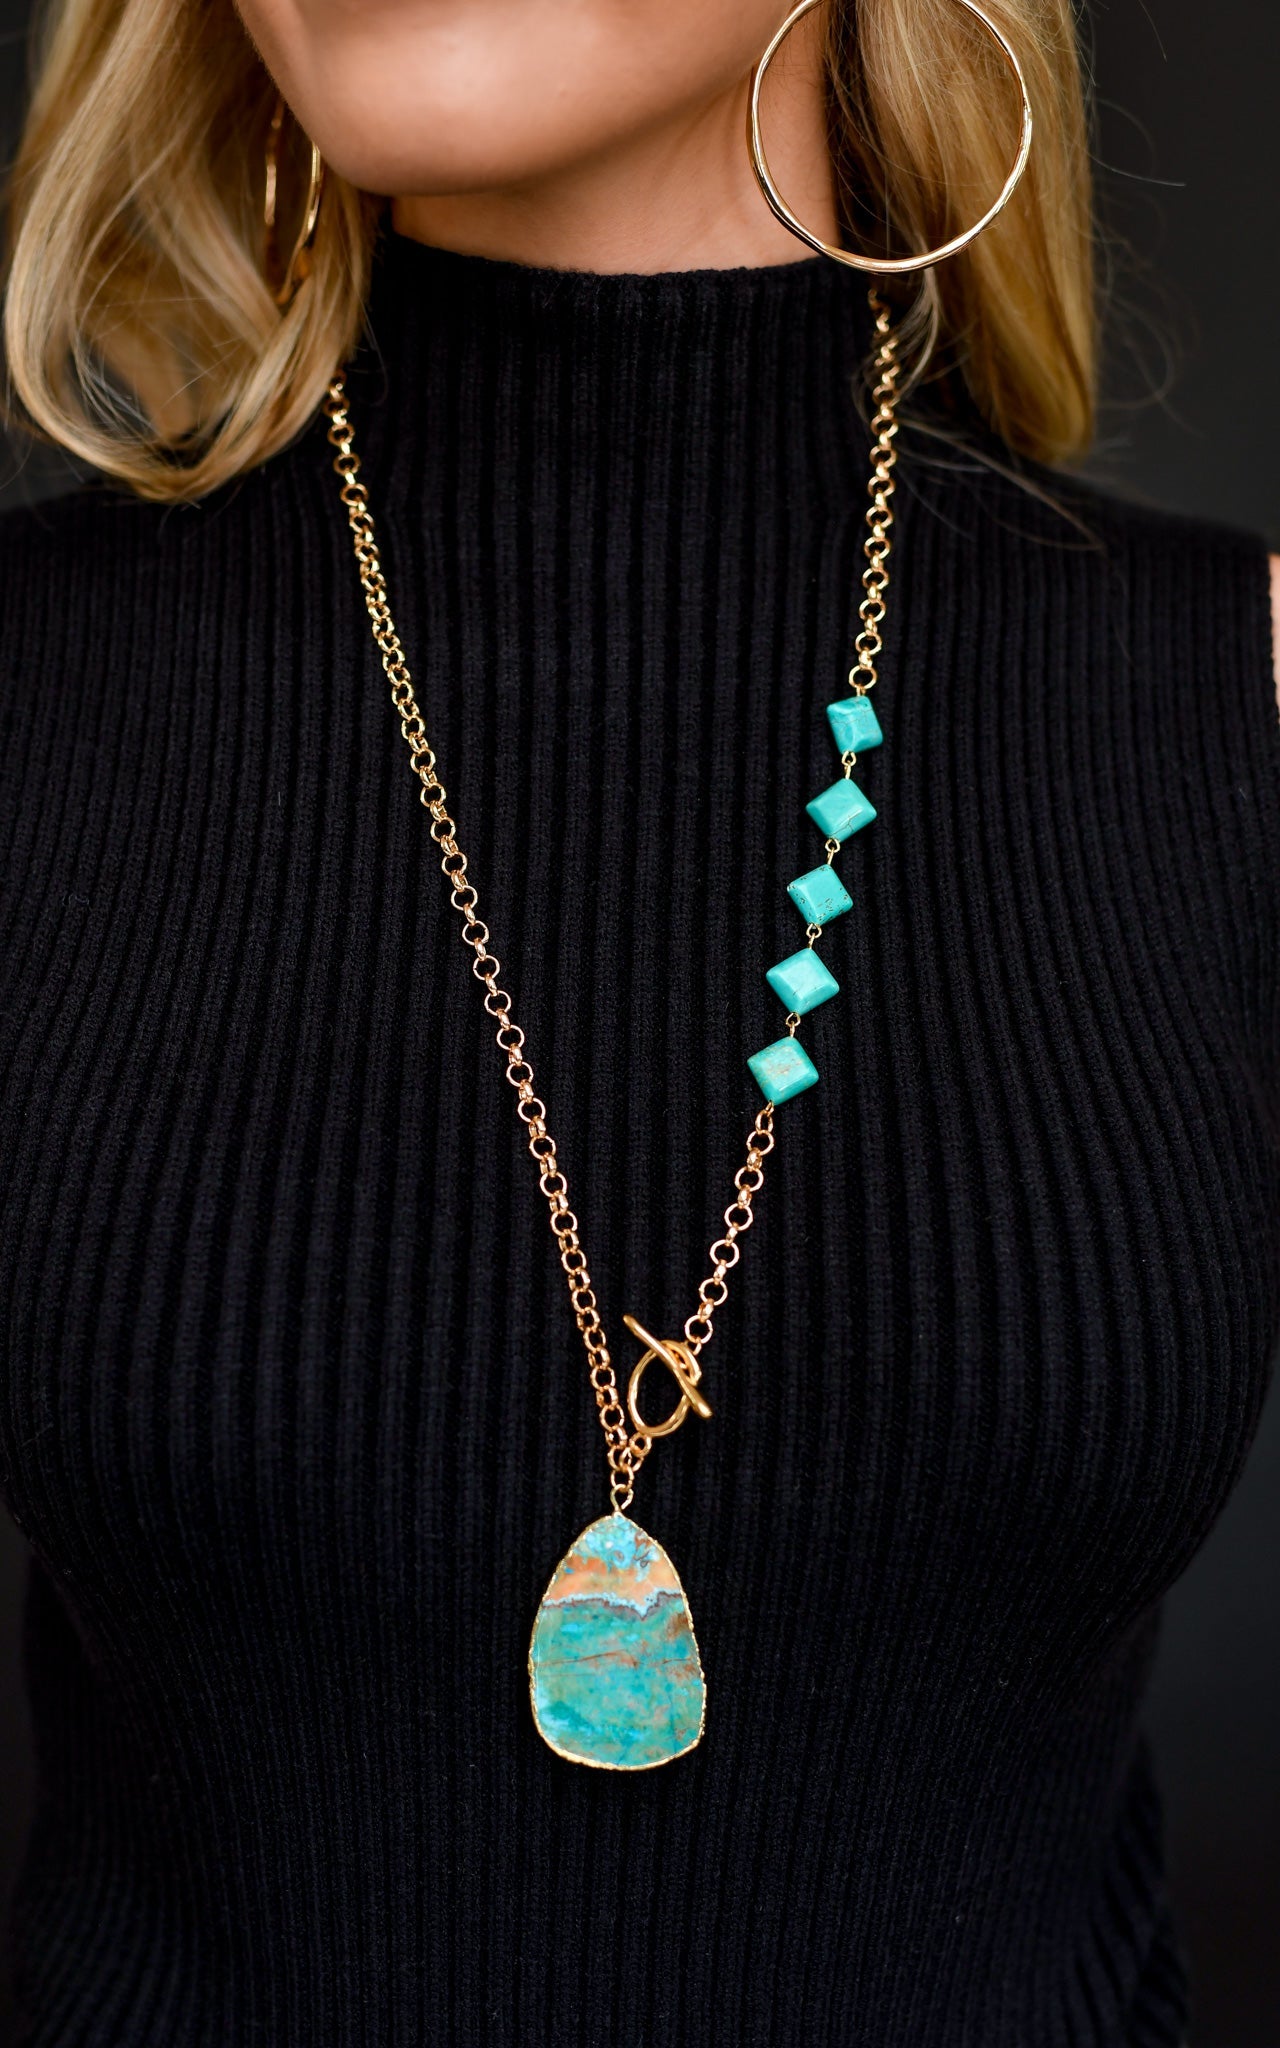 Gold Chain Necklace with Turquoise Stone Pendant and Turquoise Diamond Accents